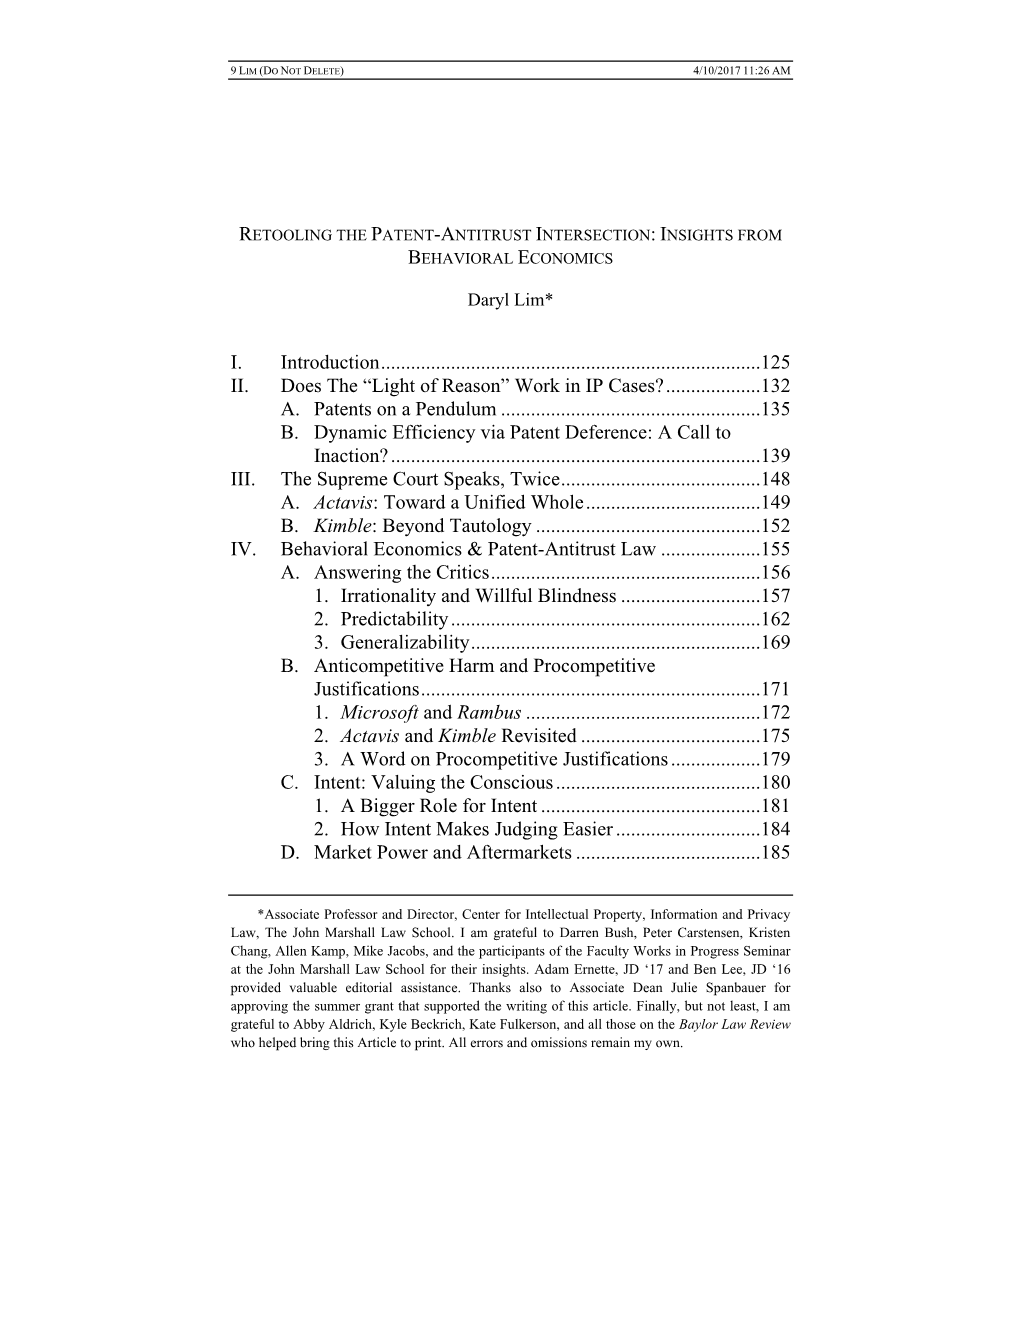 Retooling the Patent-Antitrust Intersection: Insights from Behavioral Economics